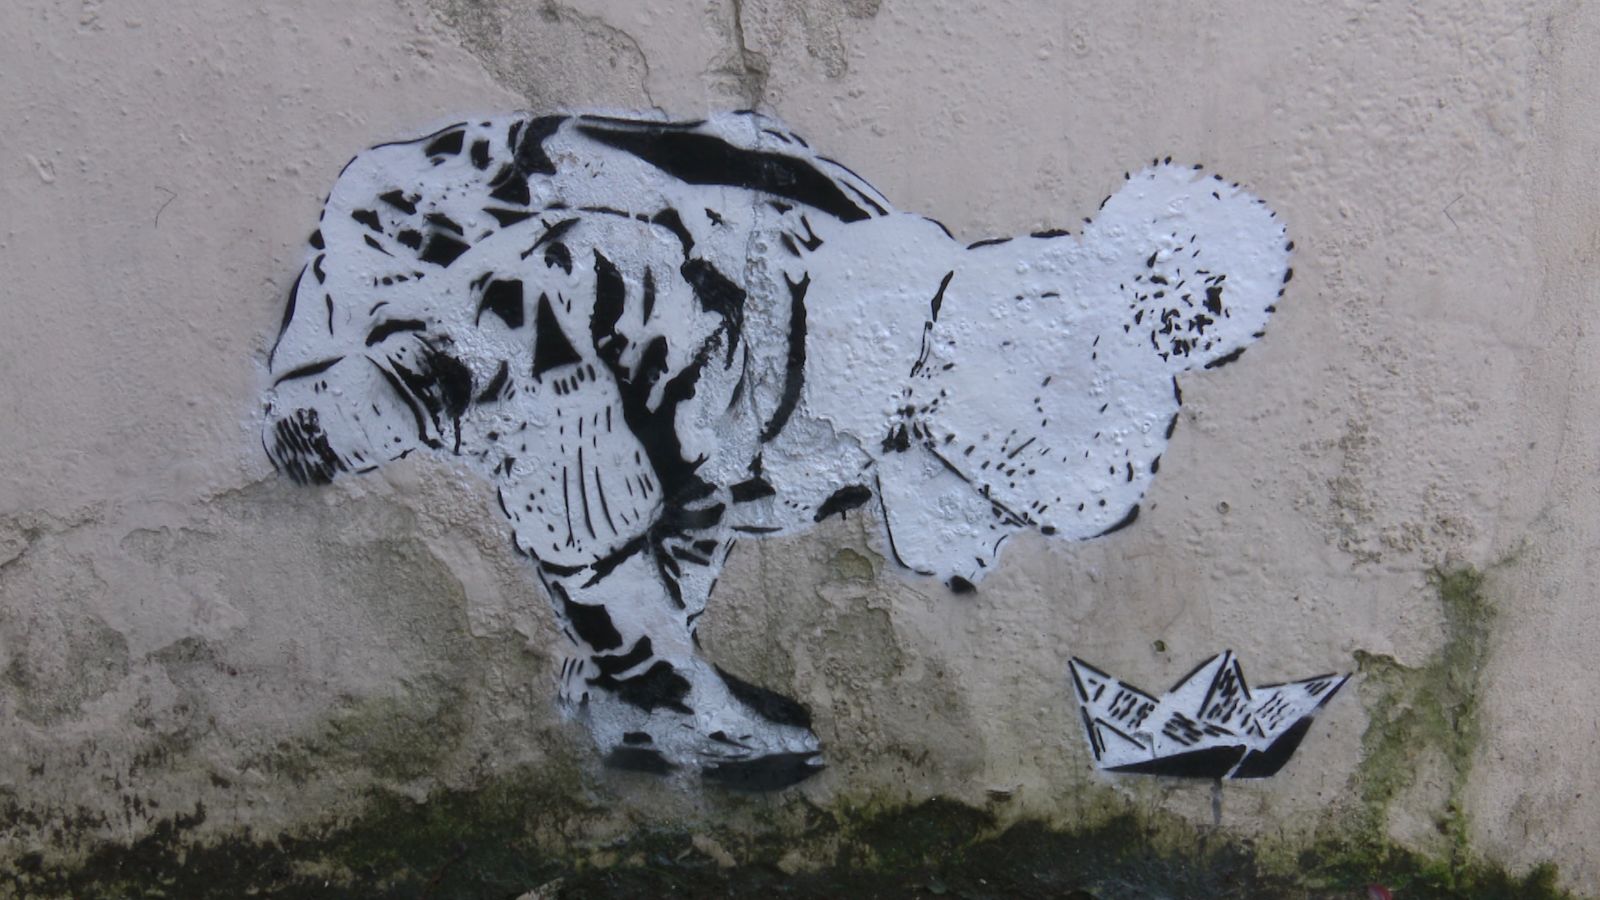 Banksy or not Banksy? New graffiti attracts crowds in Bath